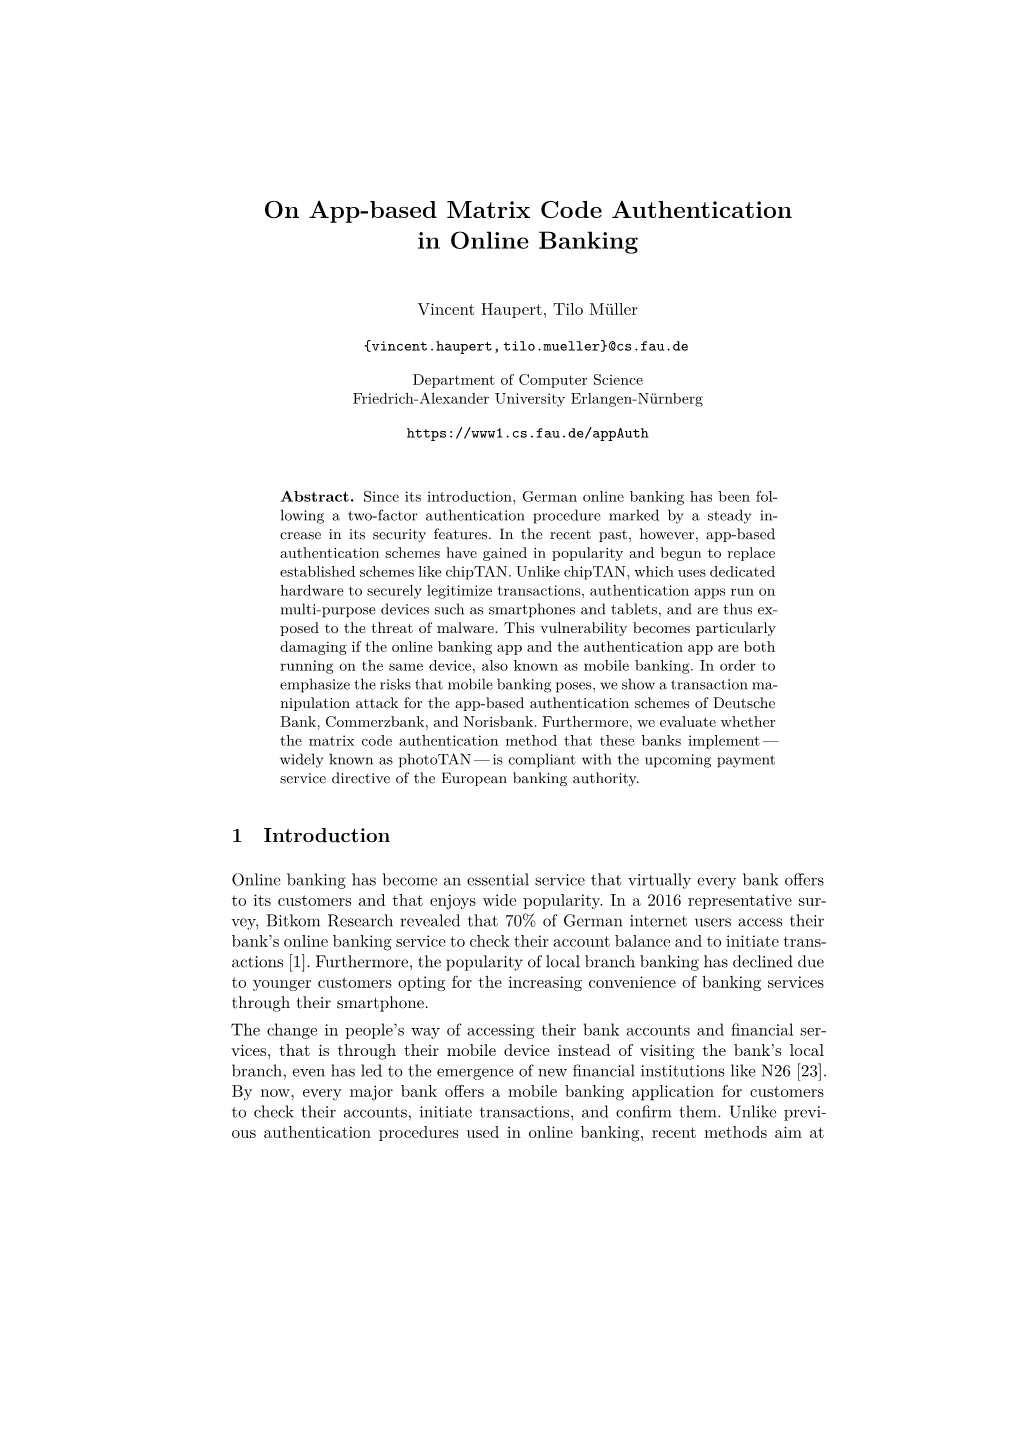 On App-Based Matrix Code Authentication in Online Banking